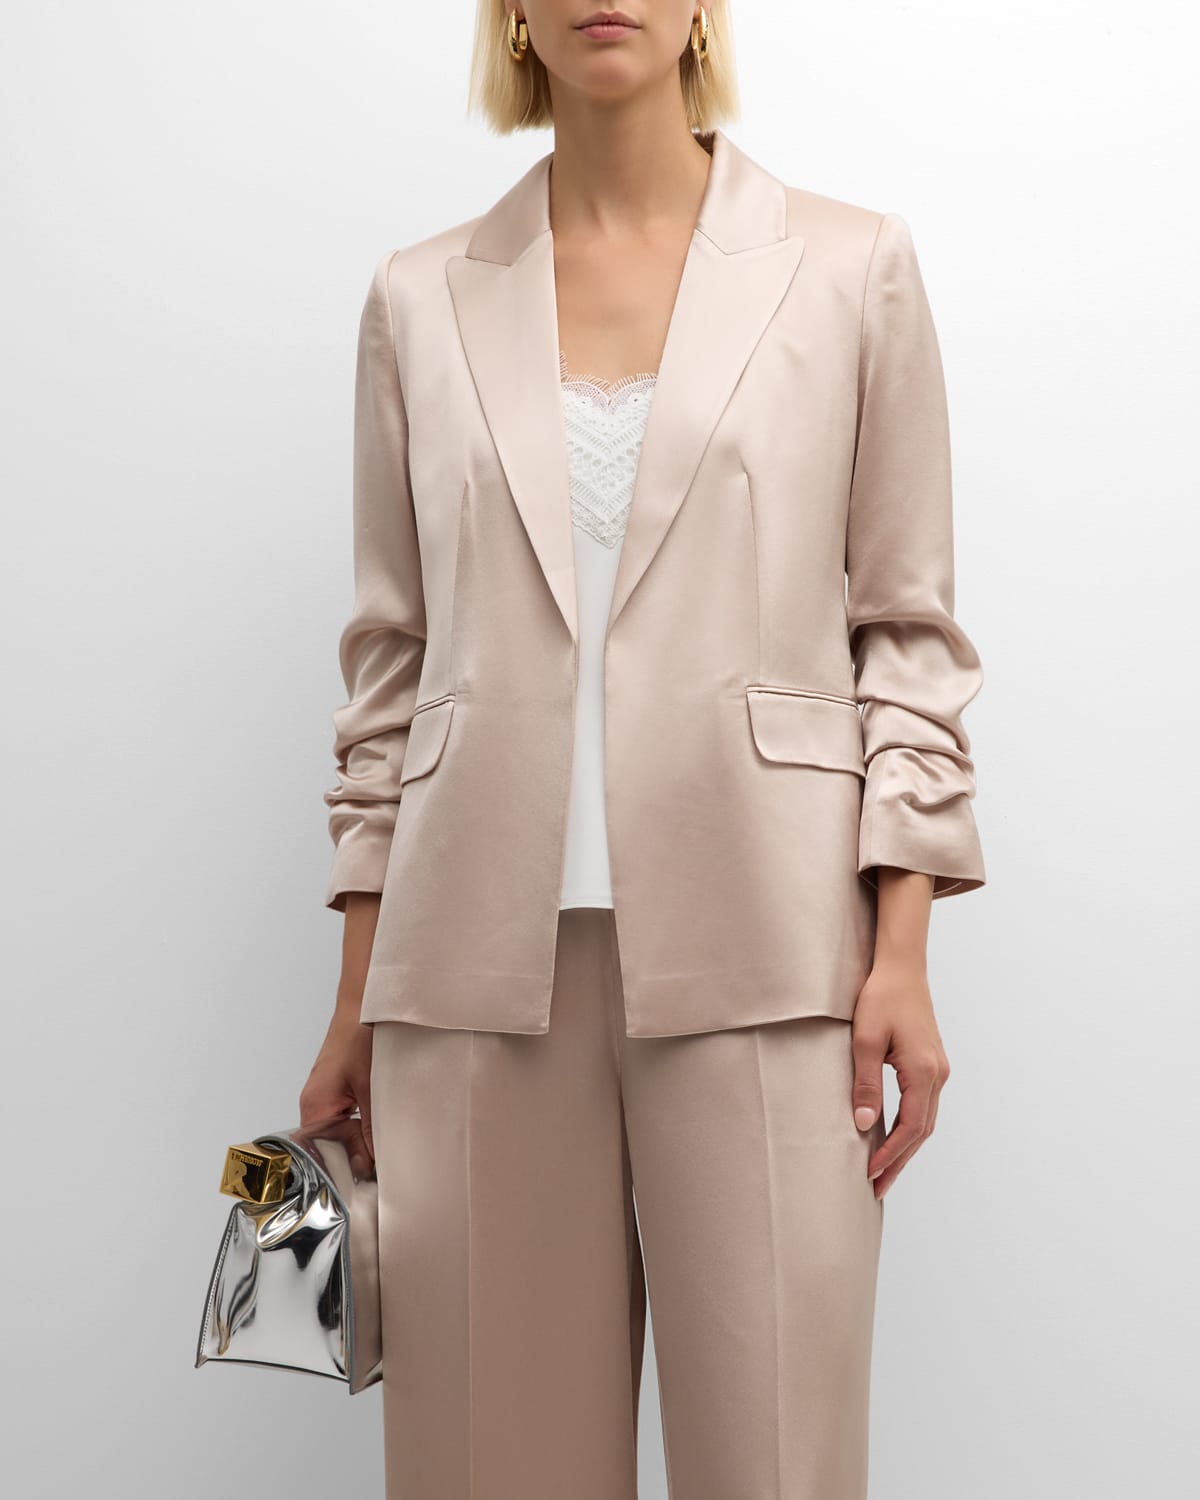 The Ashlynn Ruched Open-Front Jacket